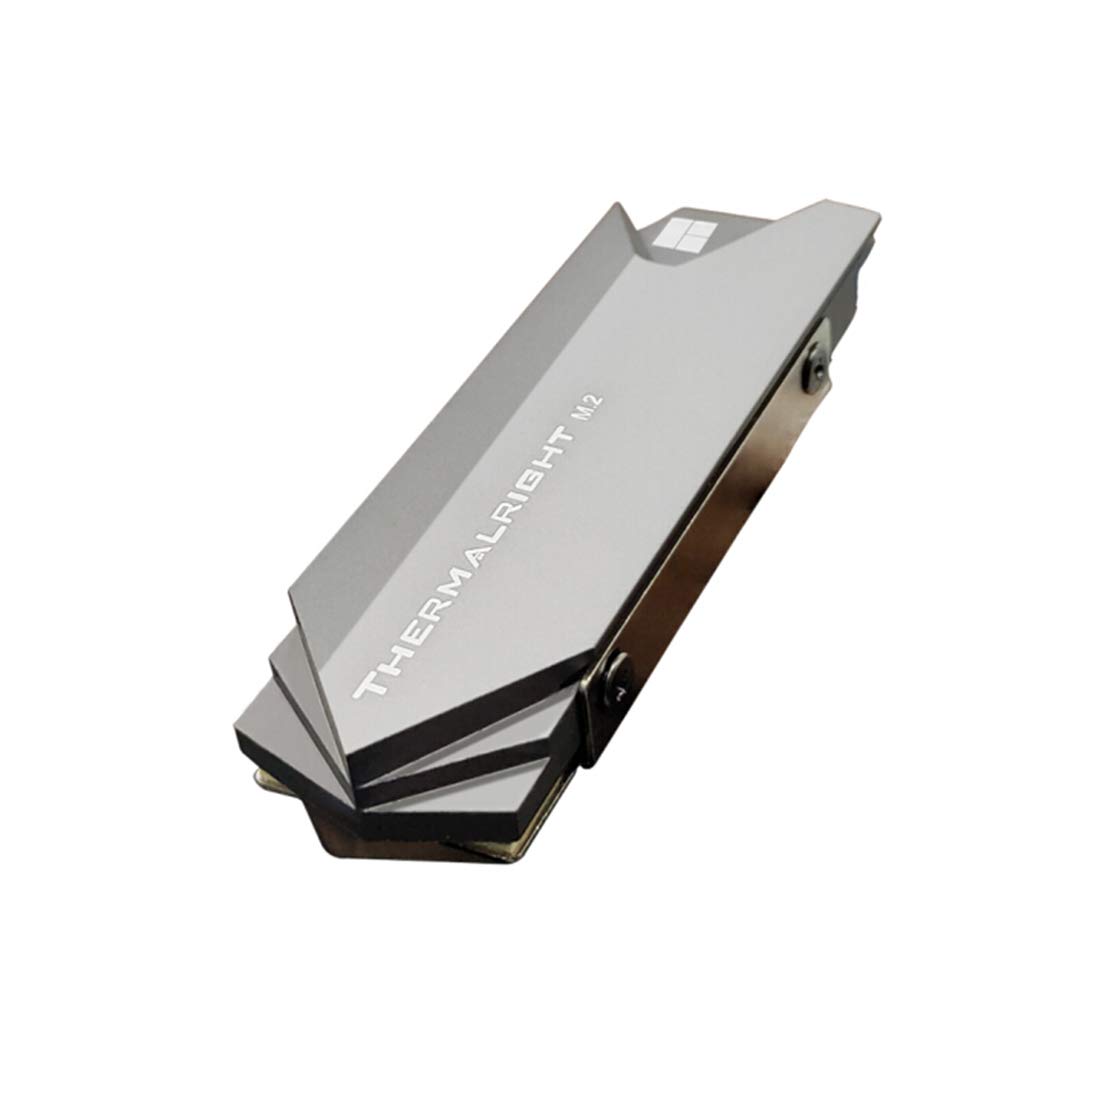 Aluminum Heatsink Cooler for M.2 2280 SSD with Silicone Thermal Pad